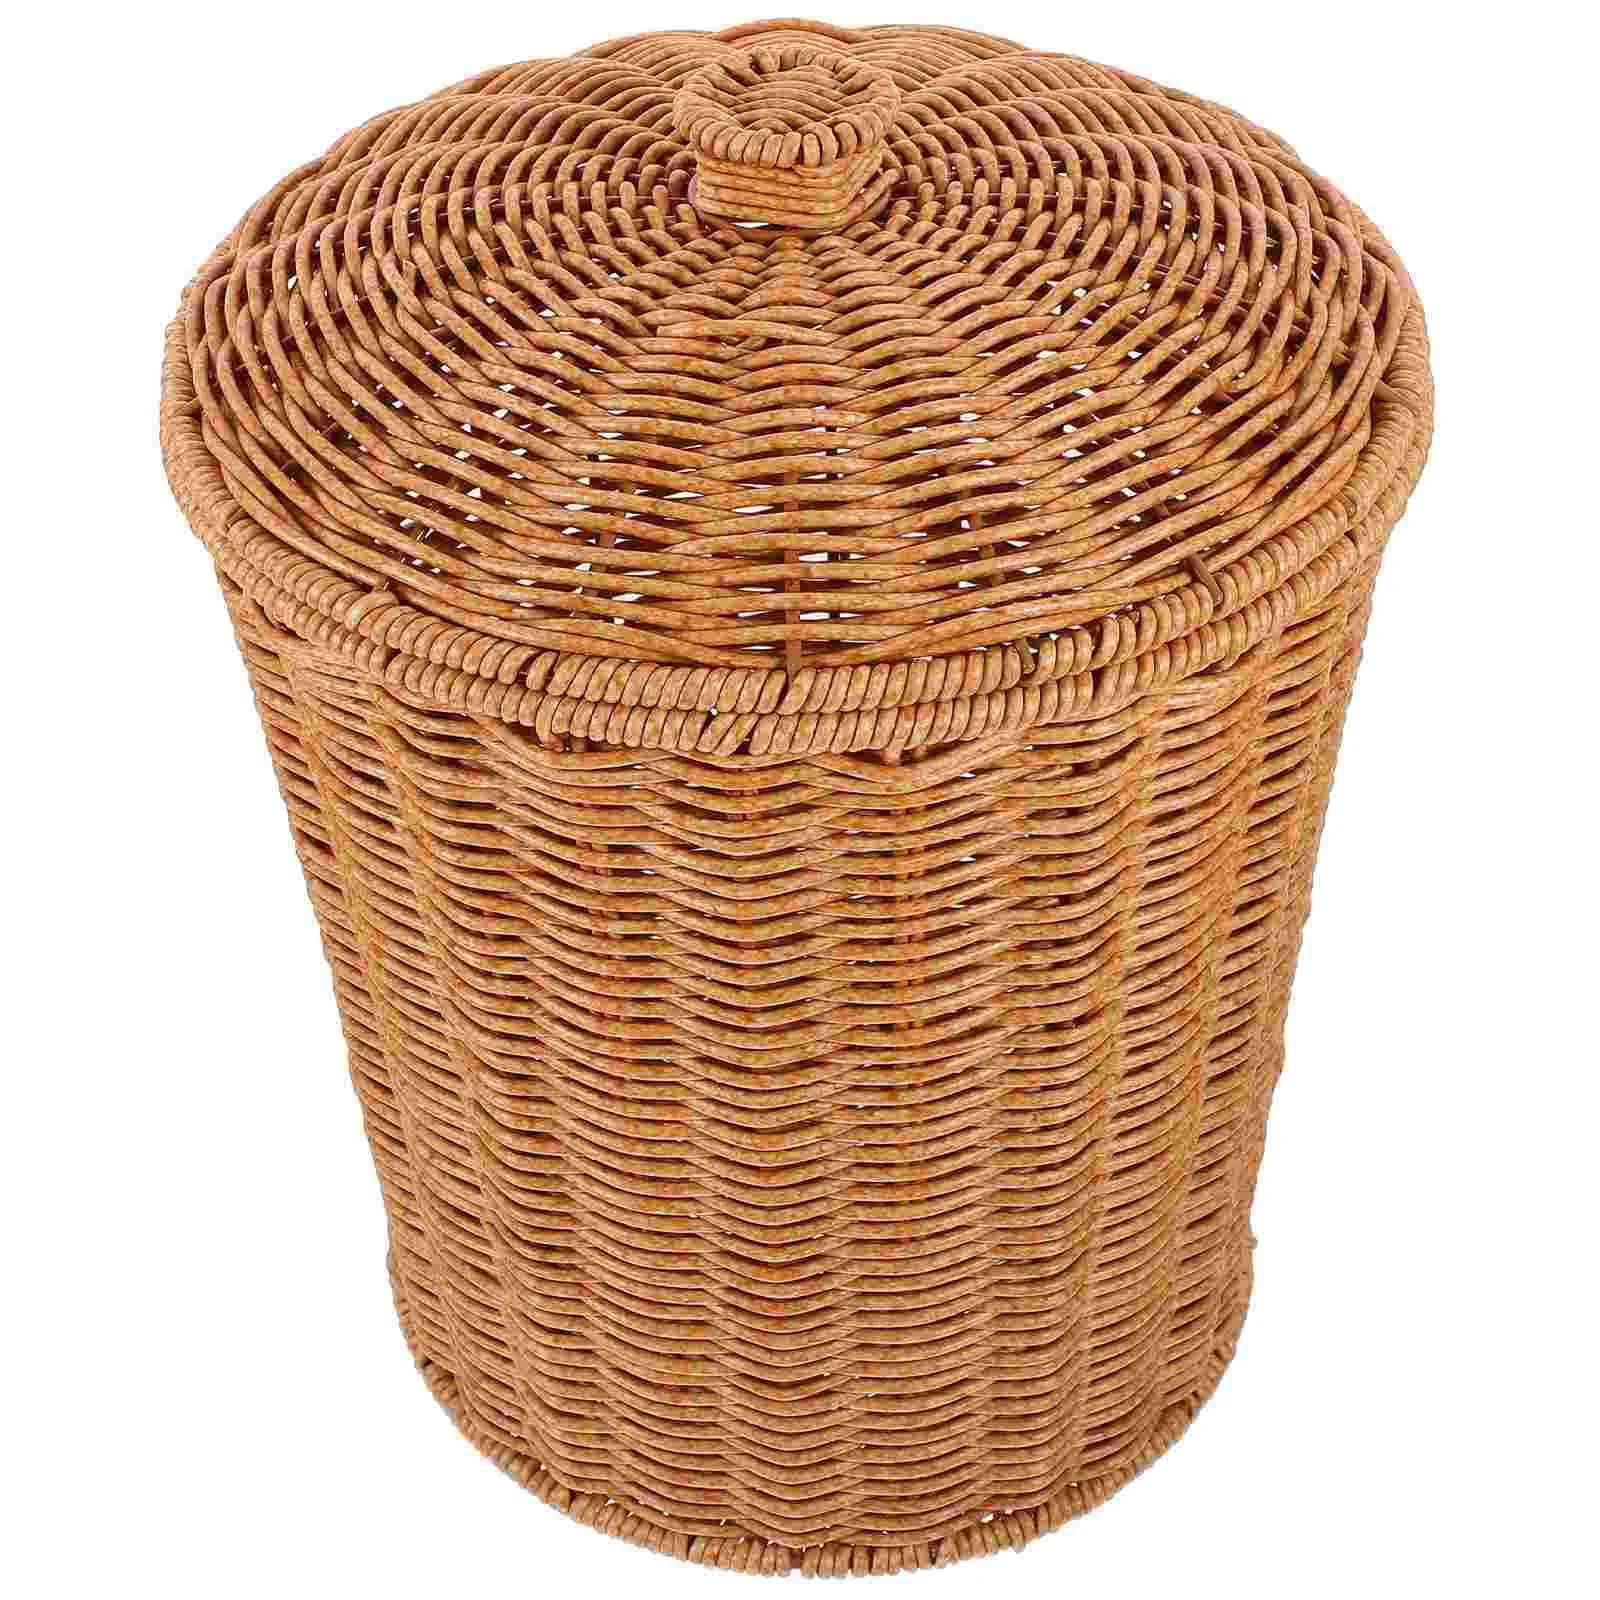 

Basket Wicker Storage Trash Can Waste Woven Laundry Baskets Rattan Bin White Garbage Hamper Clothes Lid Seagrass Dirty Container